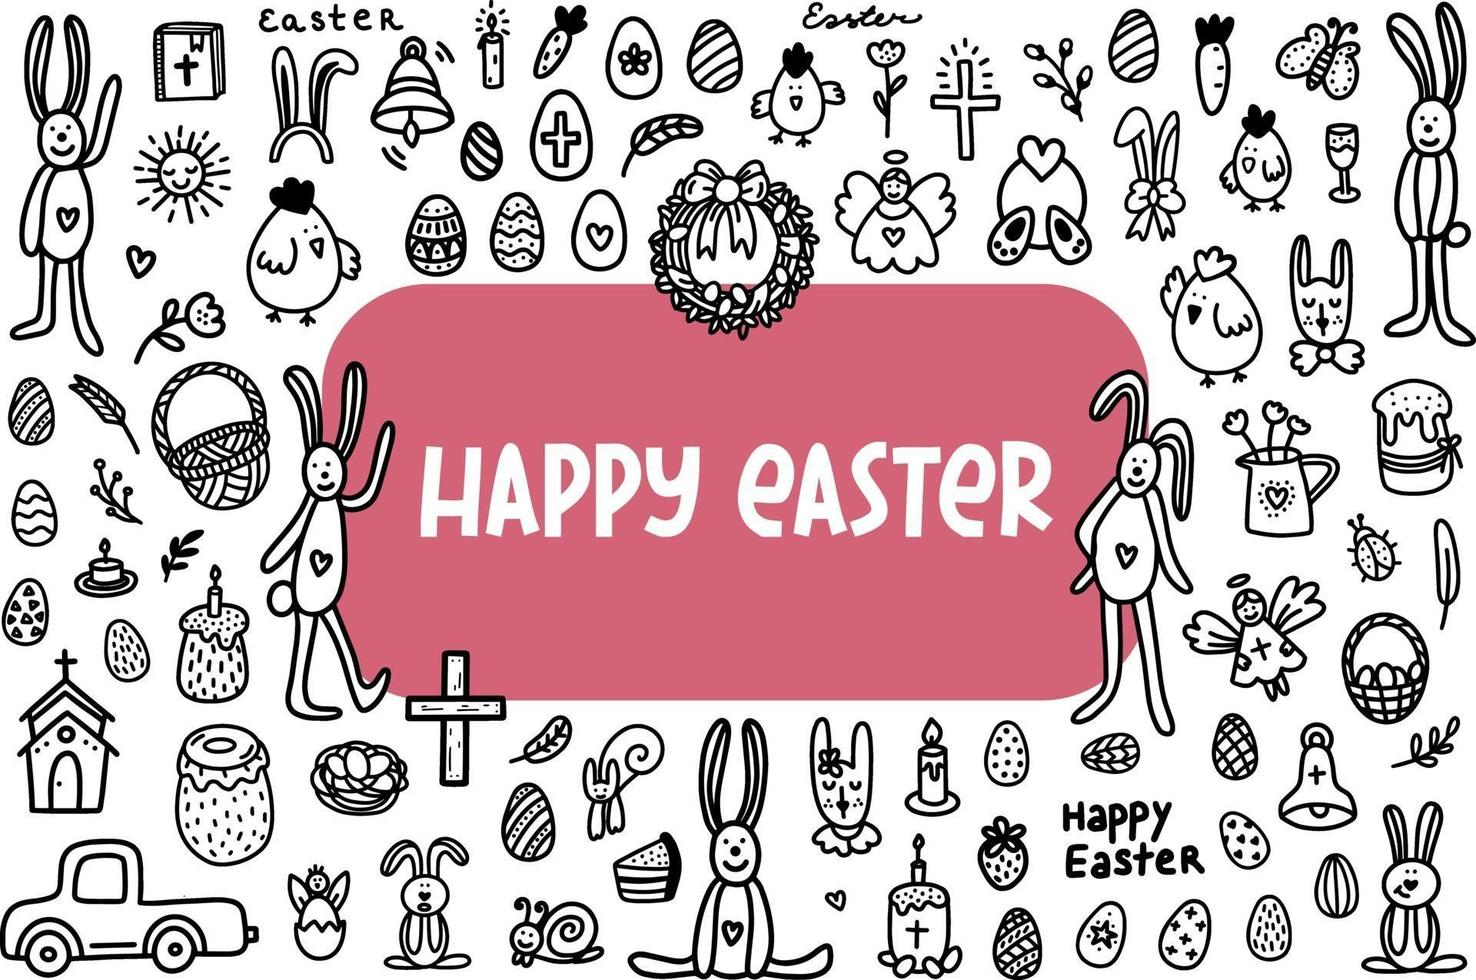 Easter doodles set. Hand-drawn vector illustration in the doodle style